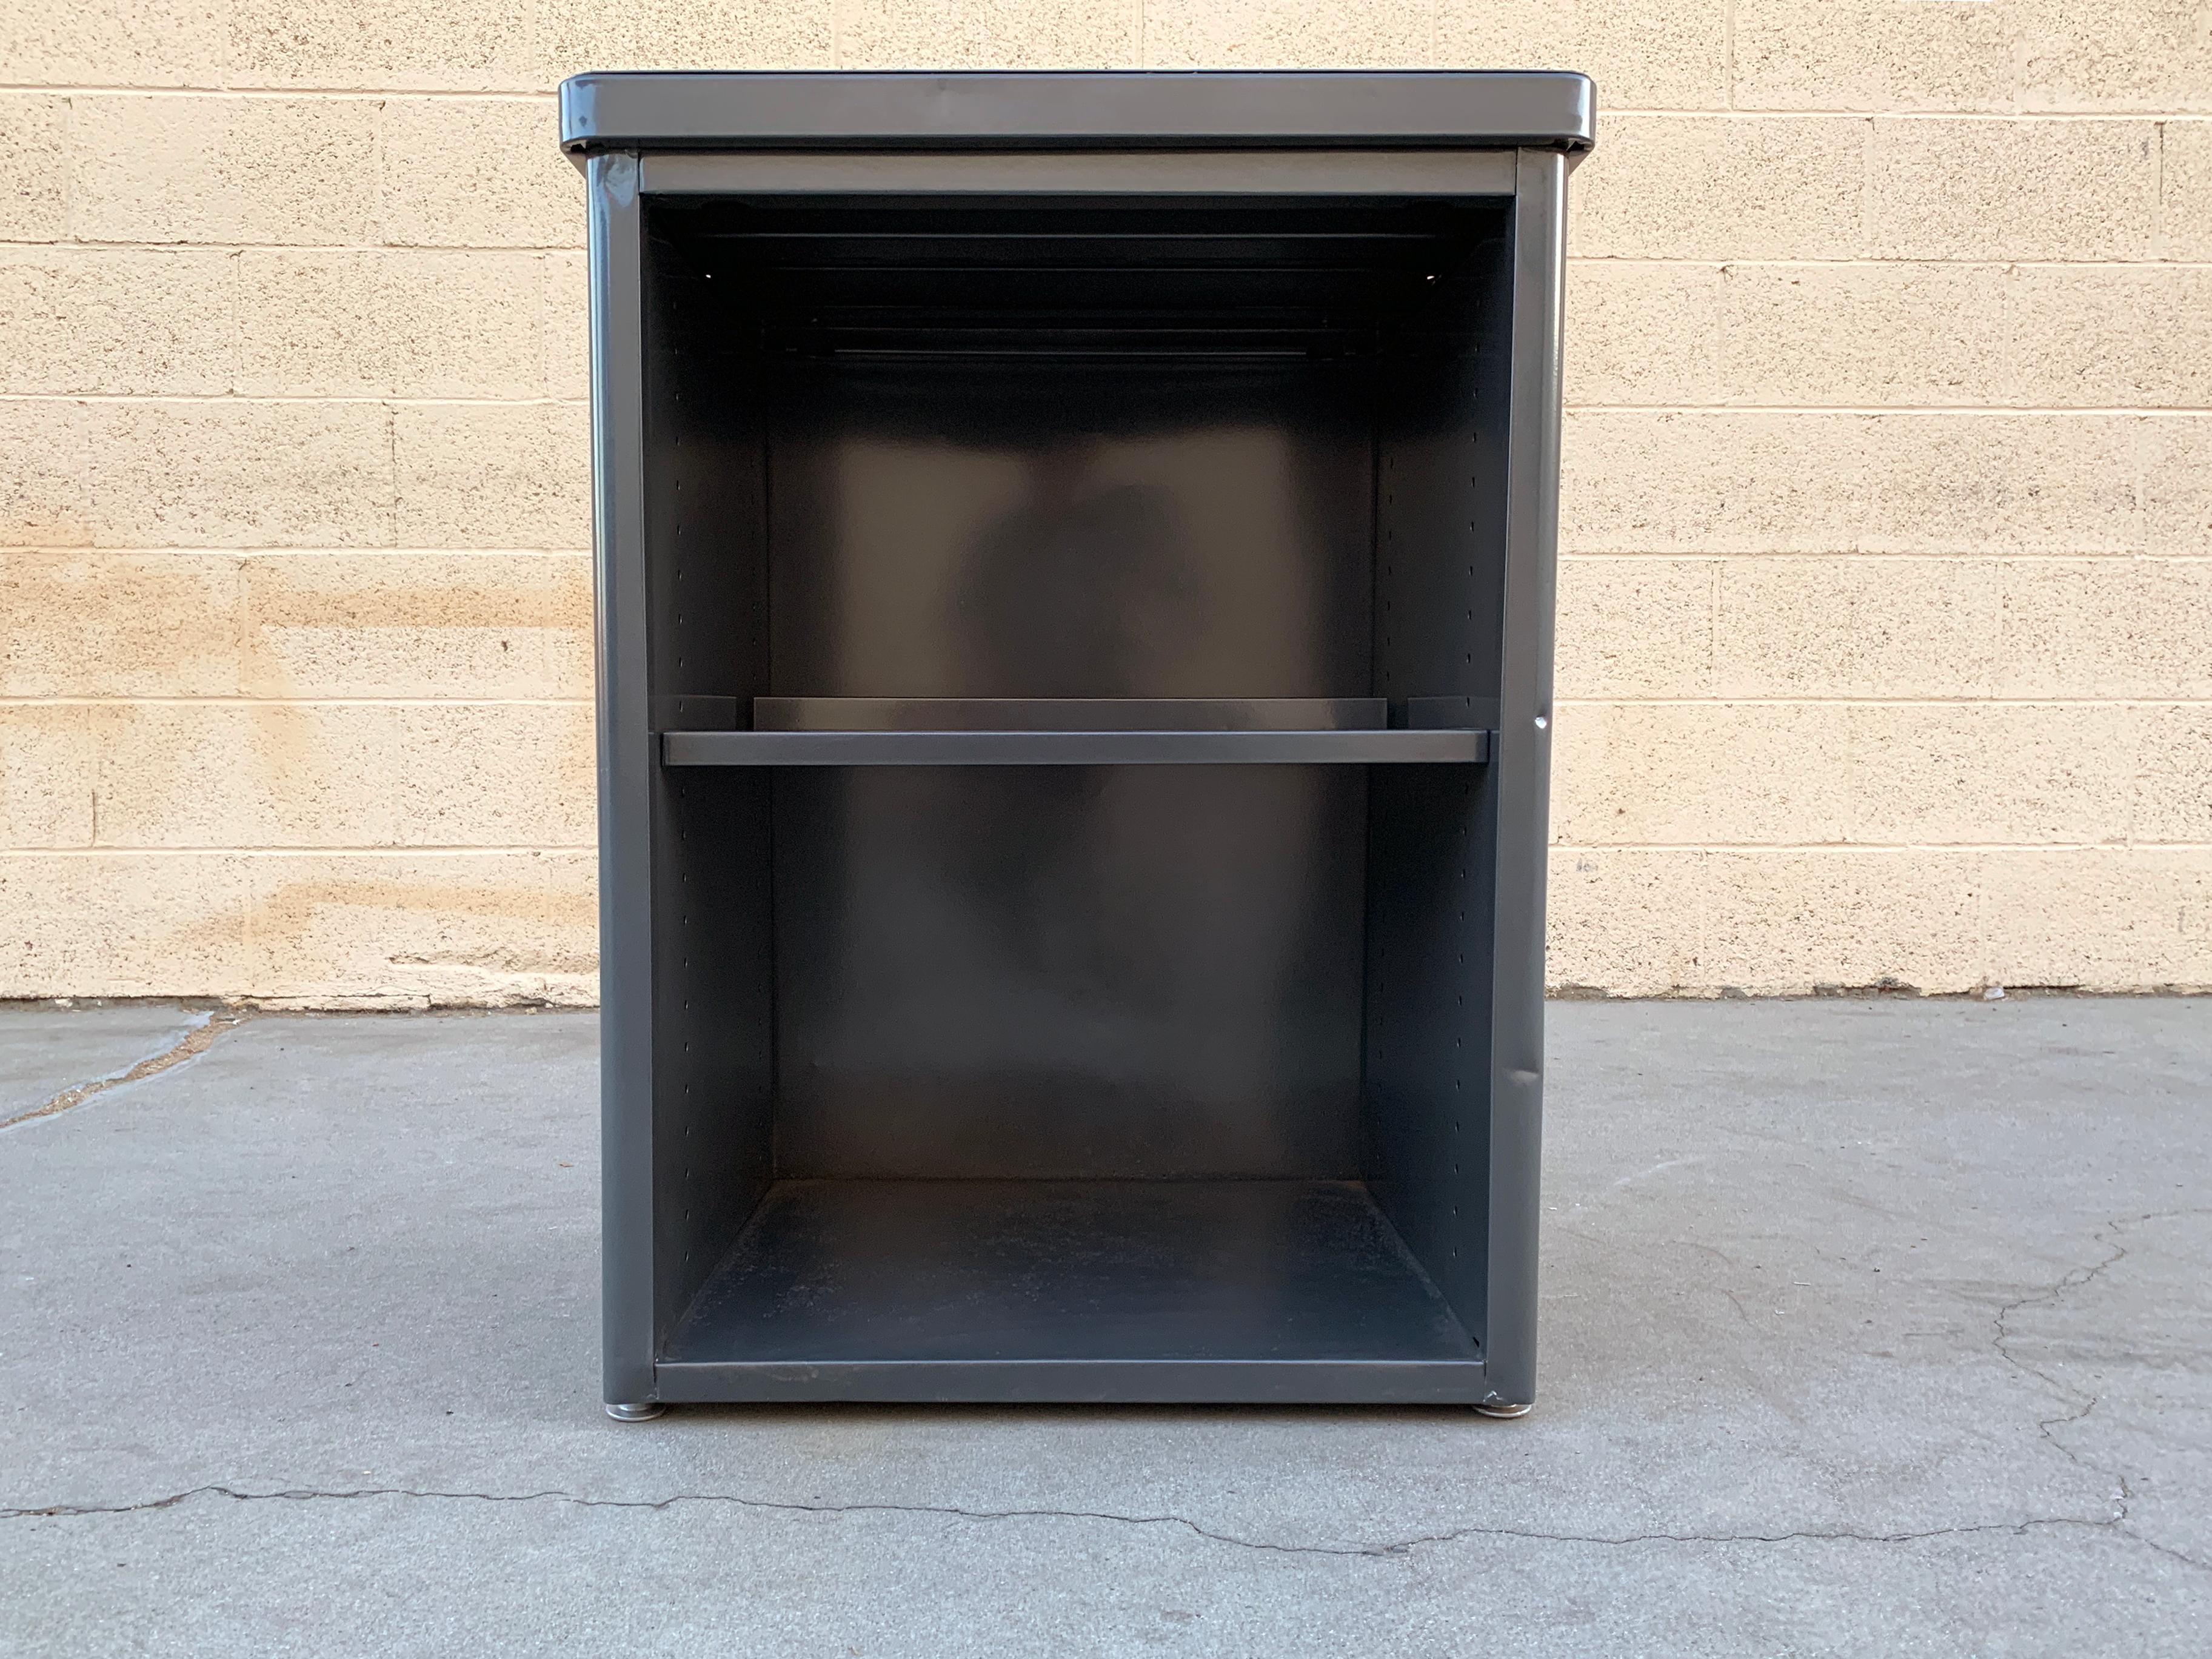 Good looking and versatile 1960s Steelcase cabinet refinished in Metallic Grey (GR02) powder coat. This unit features an adjustable shelf making it an ideal choice for table and storage in an office, workspace, kitchen or bathroom. Vintage steel